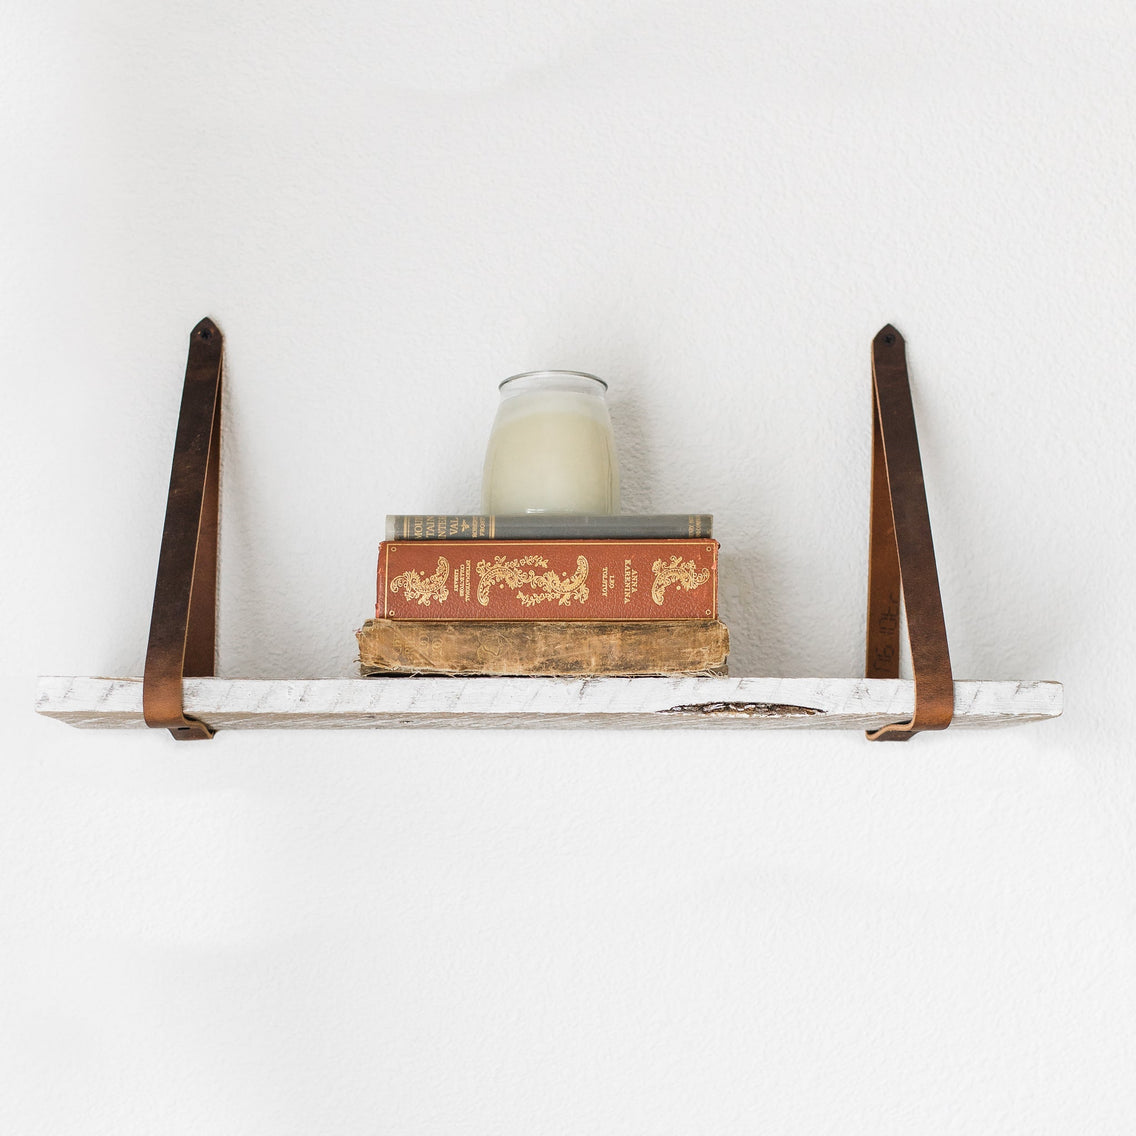 Leather strap reclaimed wood wall shelf in white wash